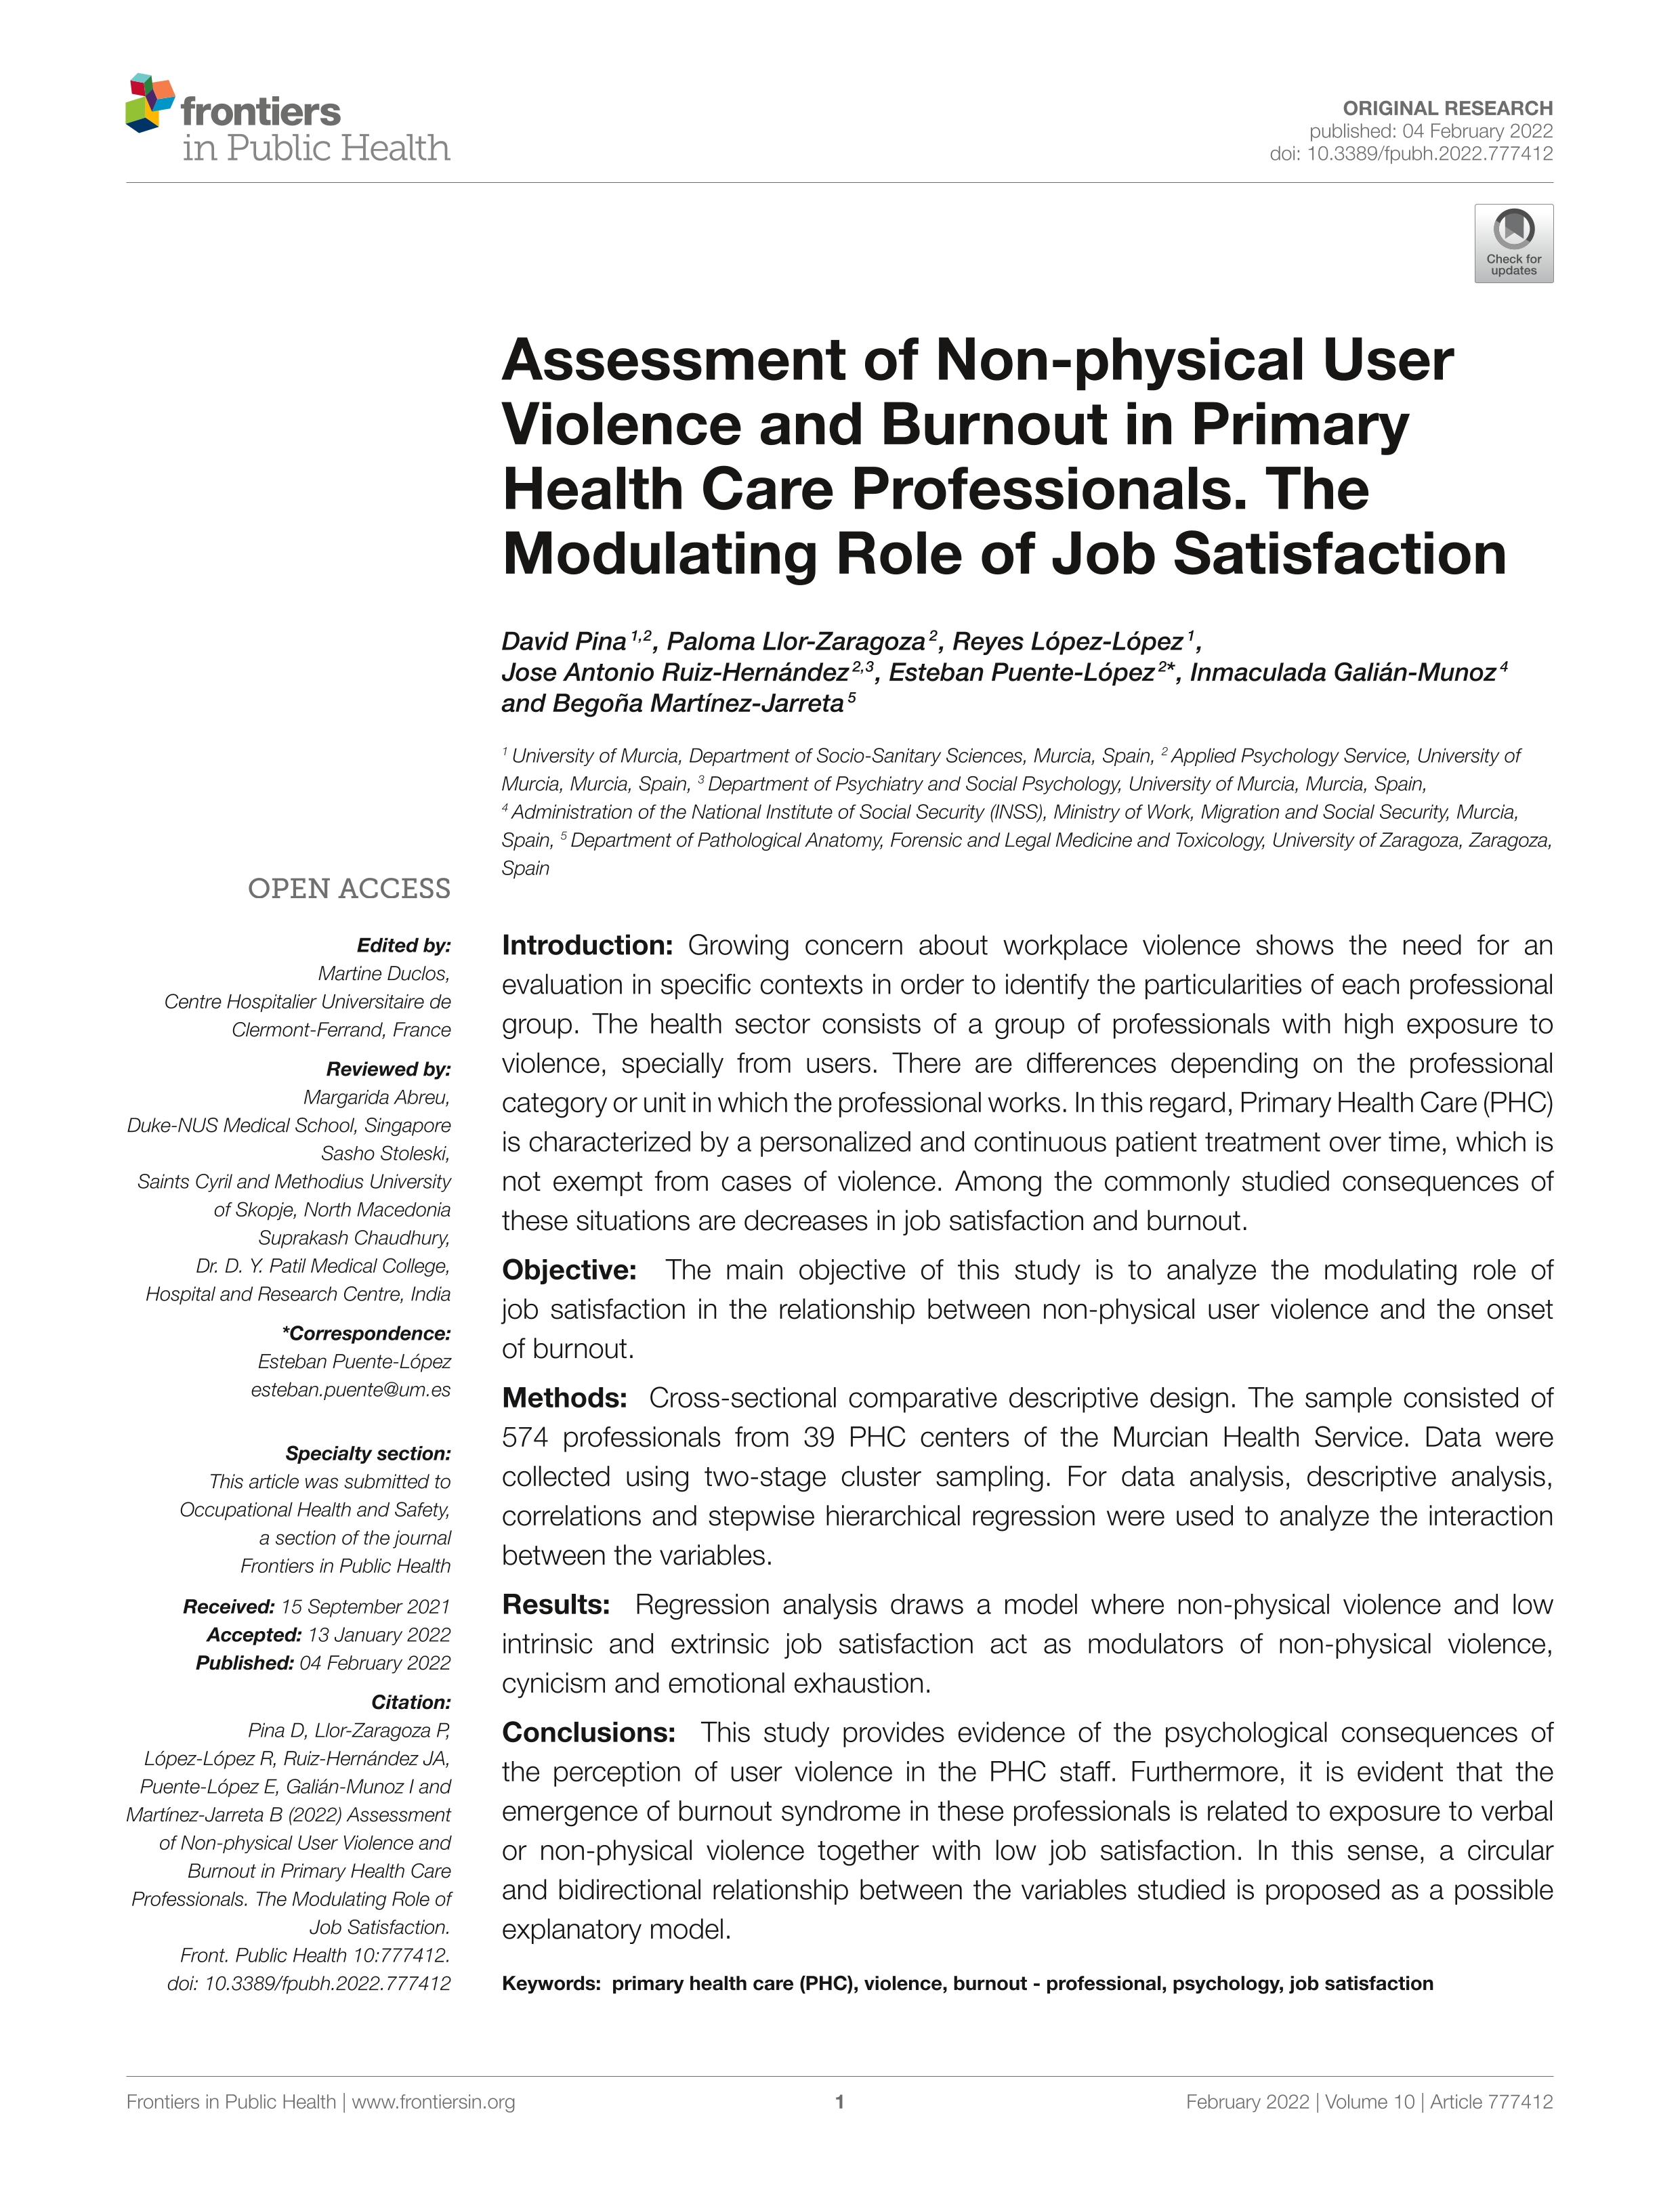 Assessment of non-physical user violence and burnout in primary health Care professionals. The modulating role of job satisfaction